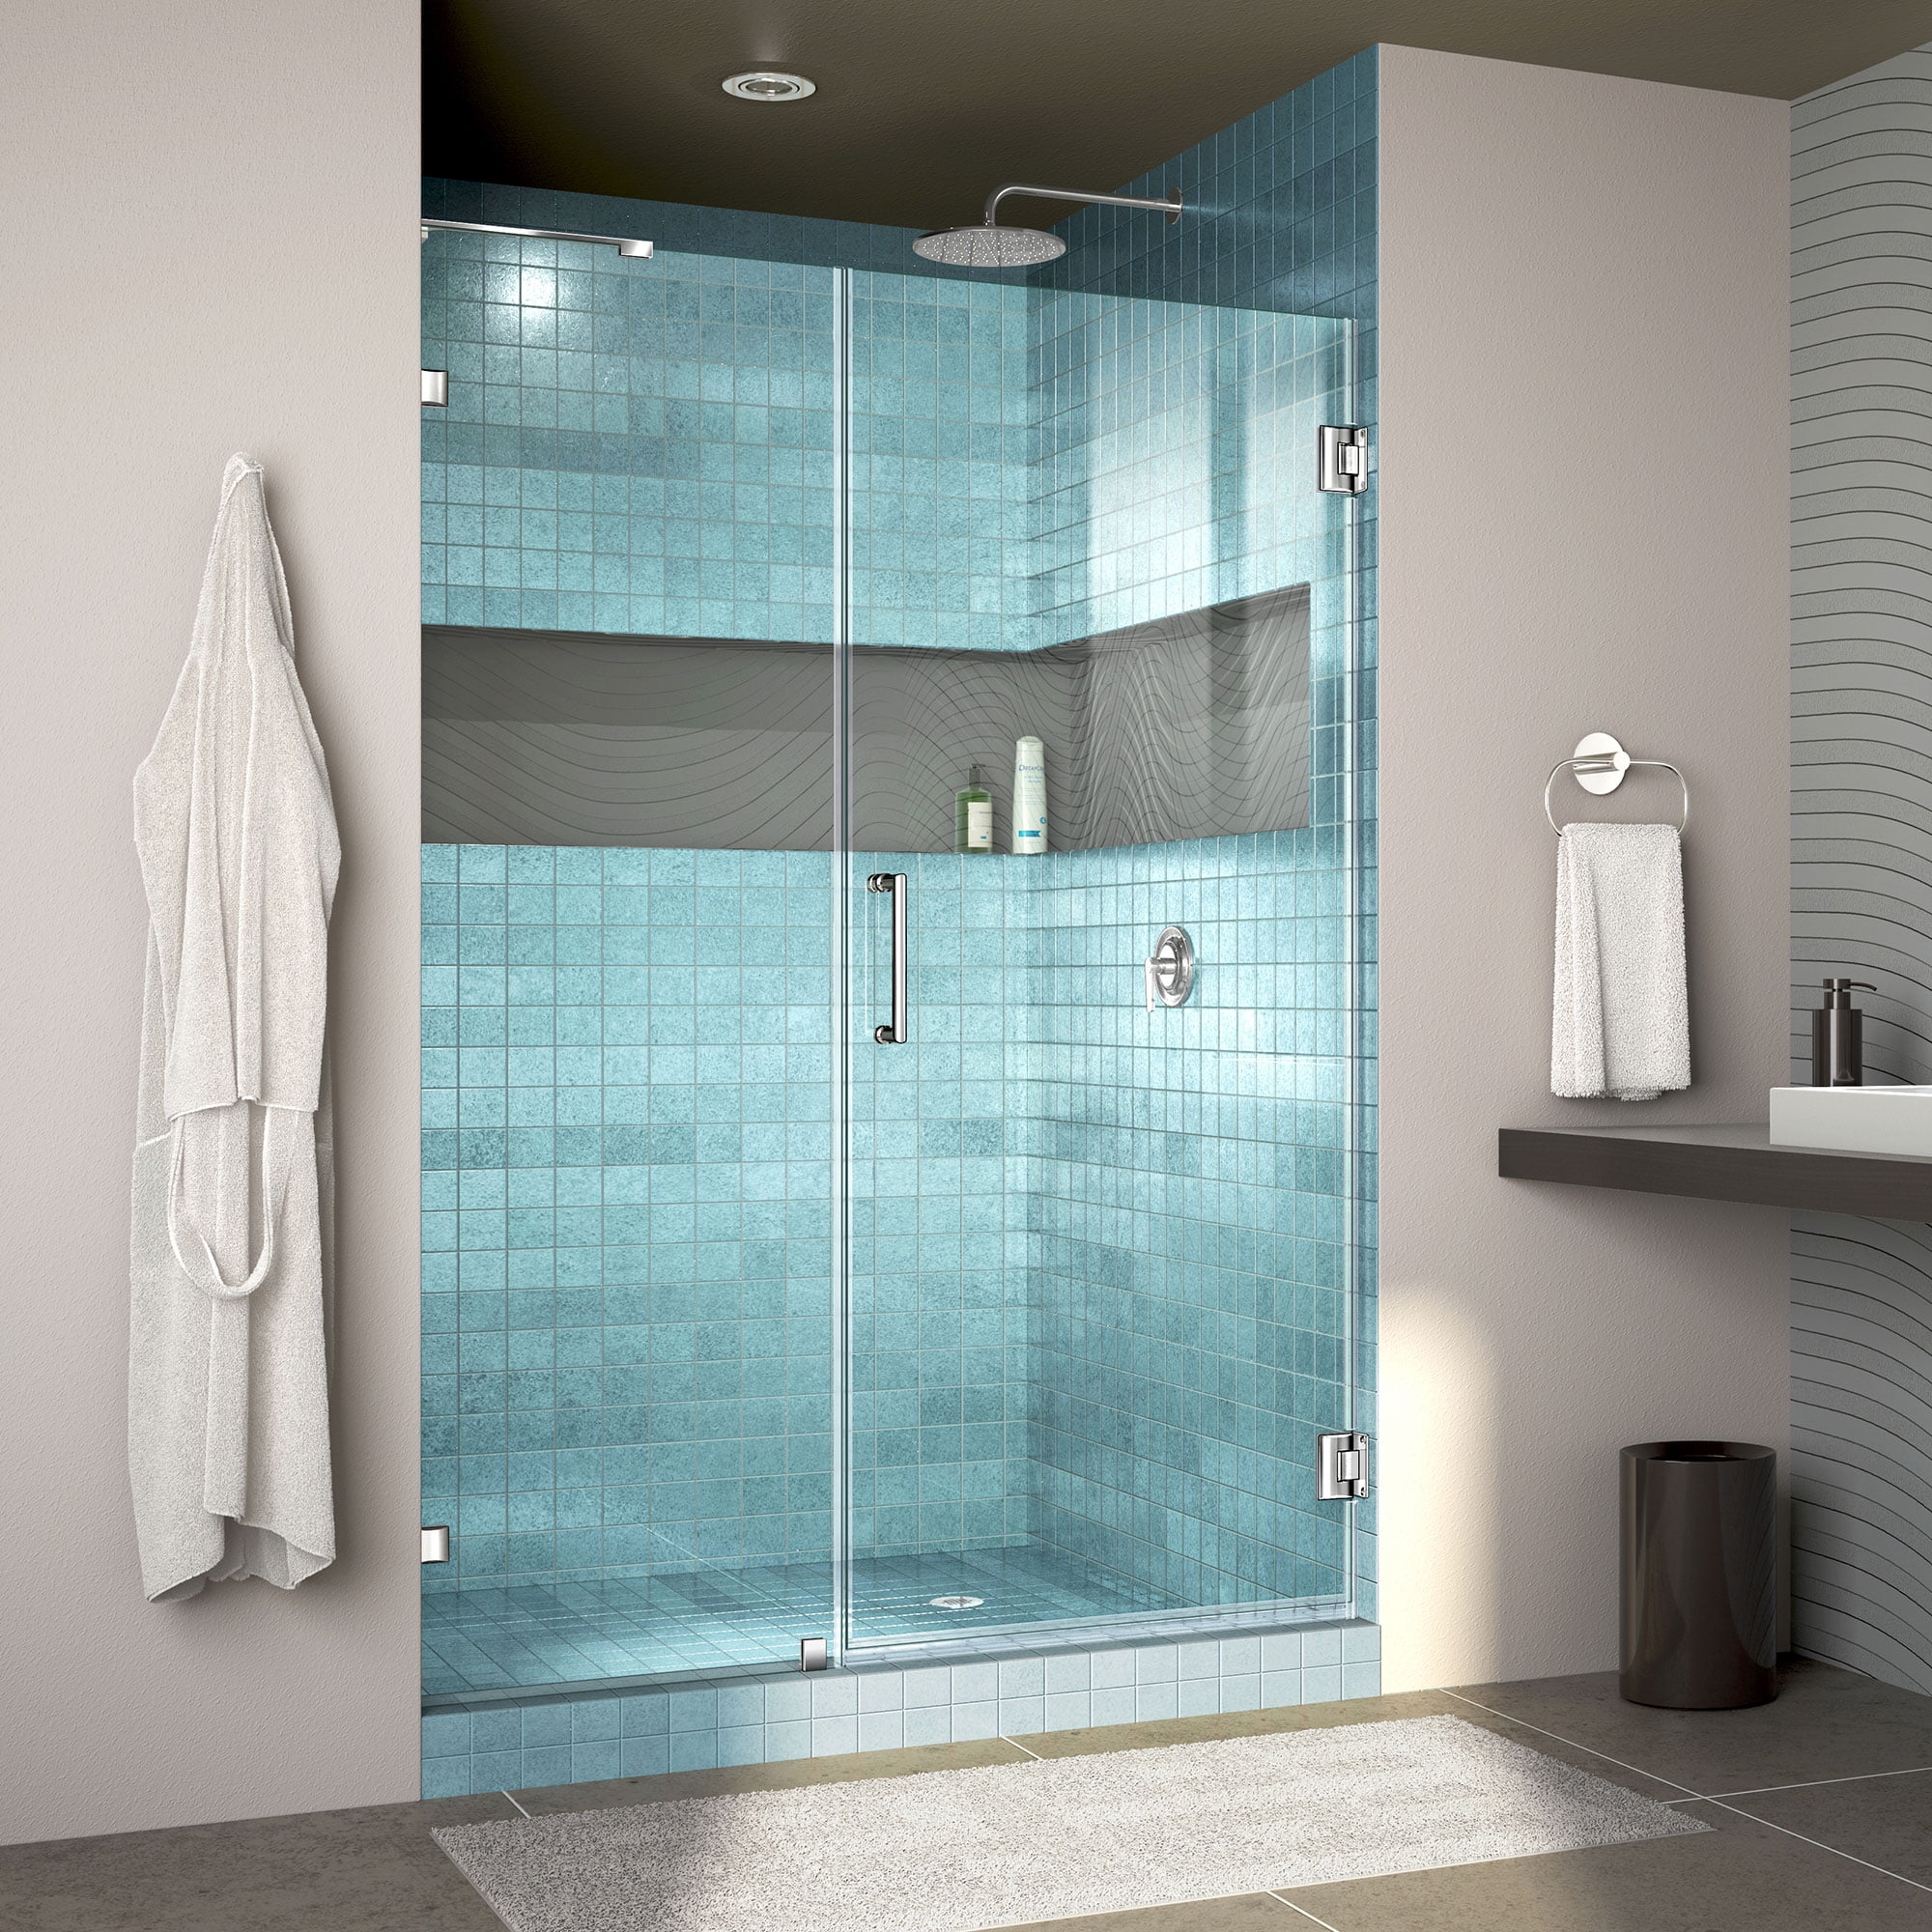 DreamLine Unidoor Lux 46 in. W x 72 in. H Fully Frameless Hinged Shower Door with L-Bar in Chrome